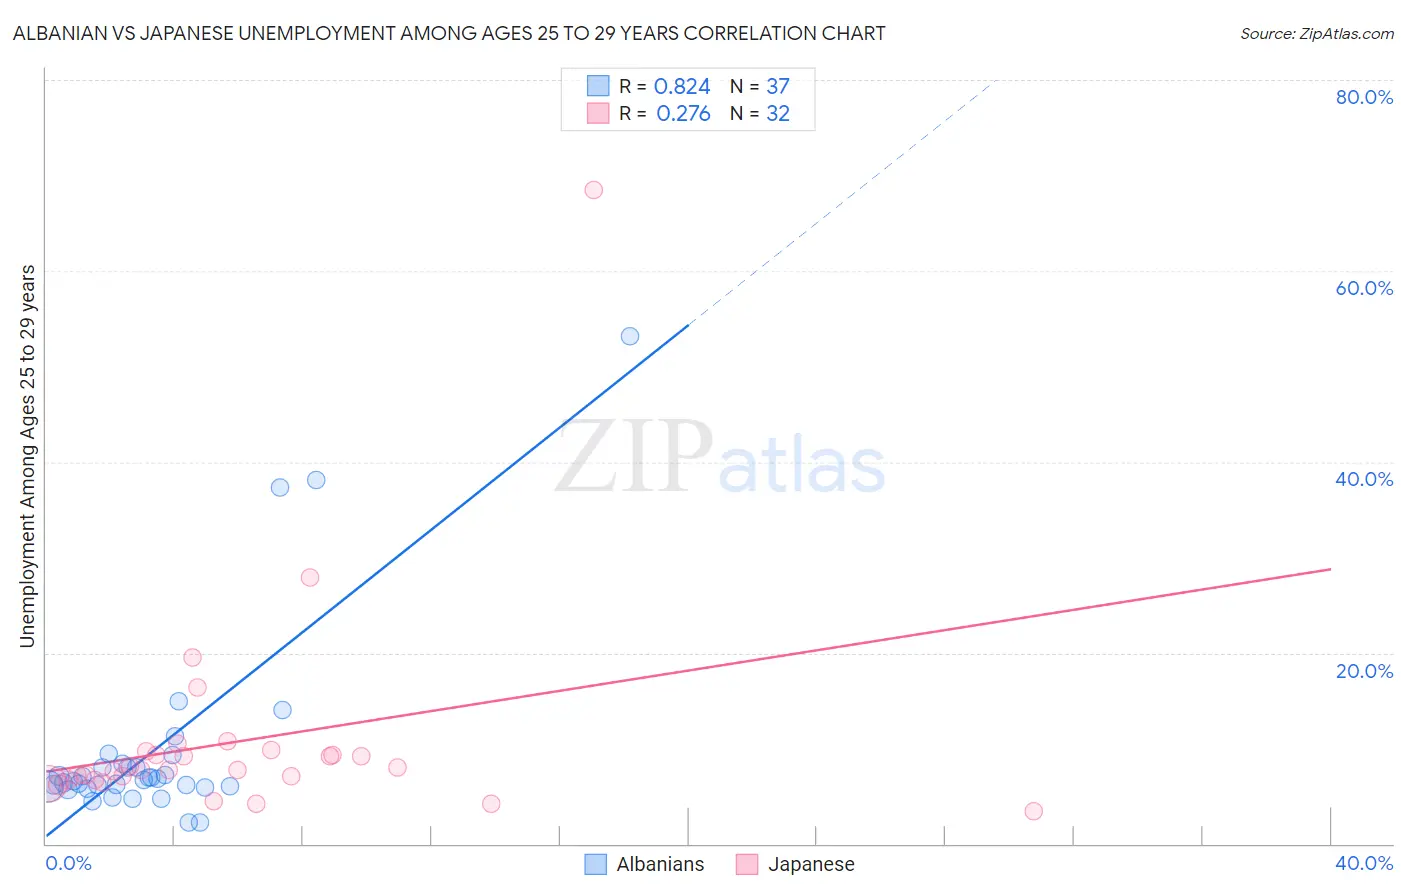 Albanian vs Japanese Unemployment Among Ages 25 to 29 years